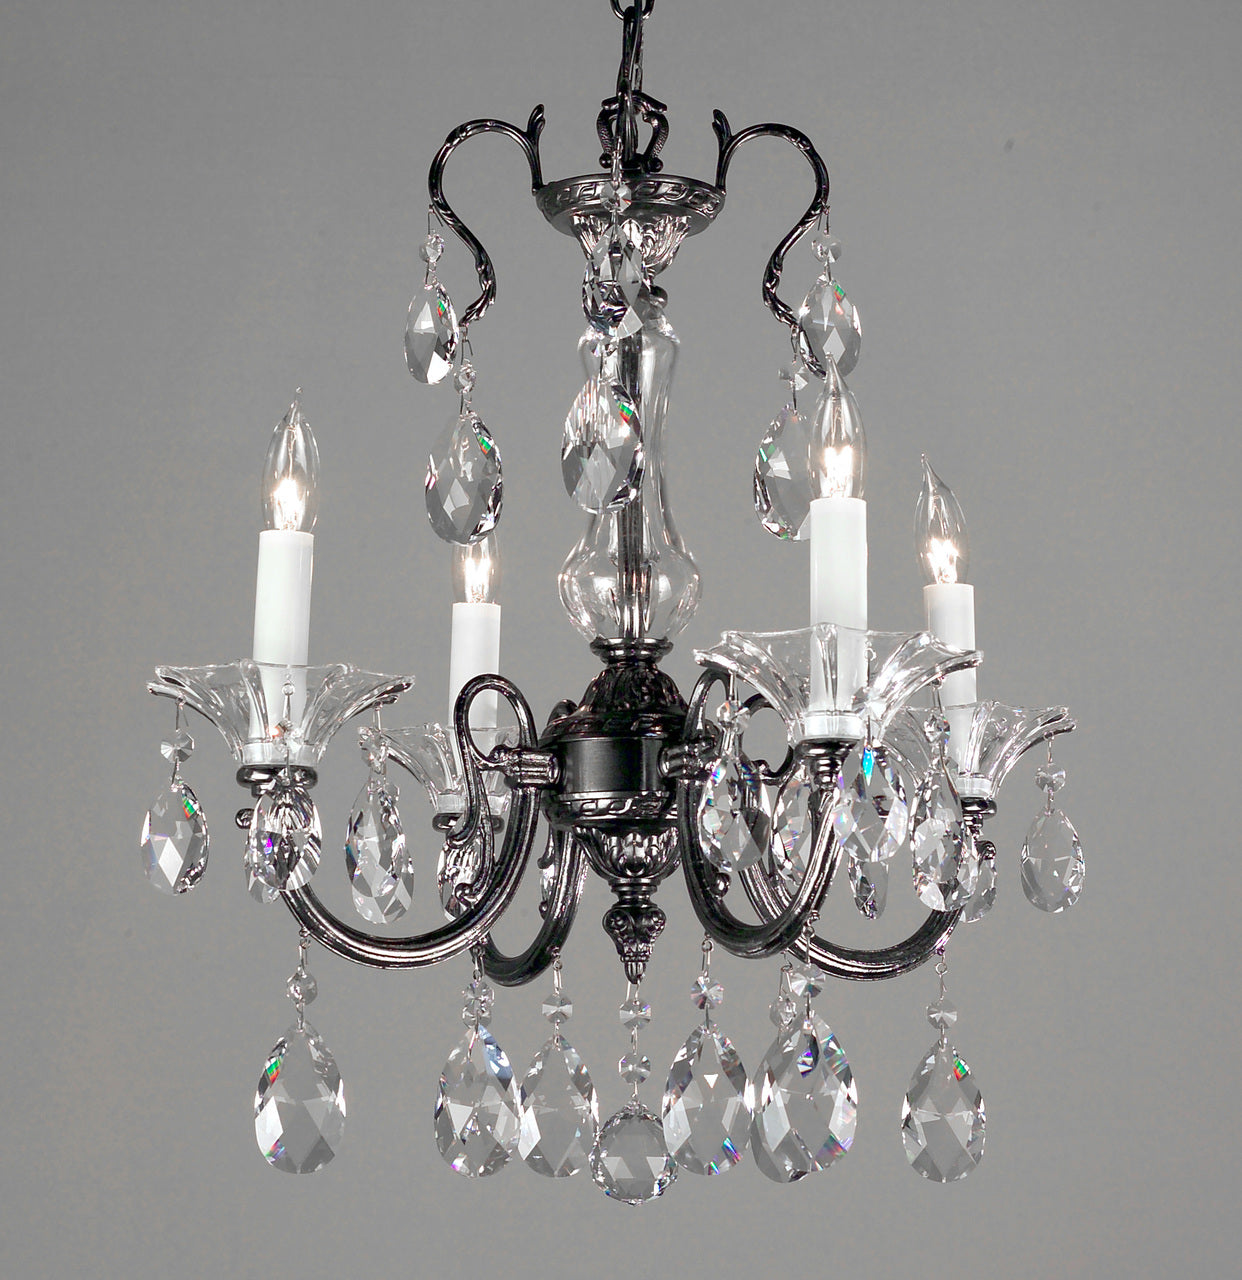 Classic Lighting 57054 EP SJT Via Lombardi Crystal Mini Chandelier in Ebony Pearl (Imported from Spain)